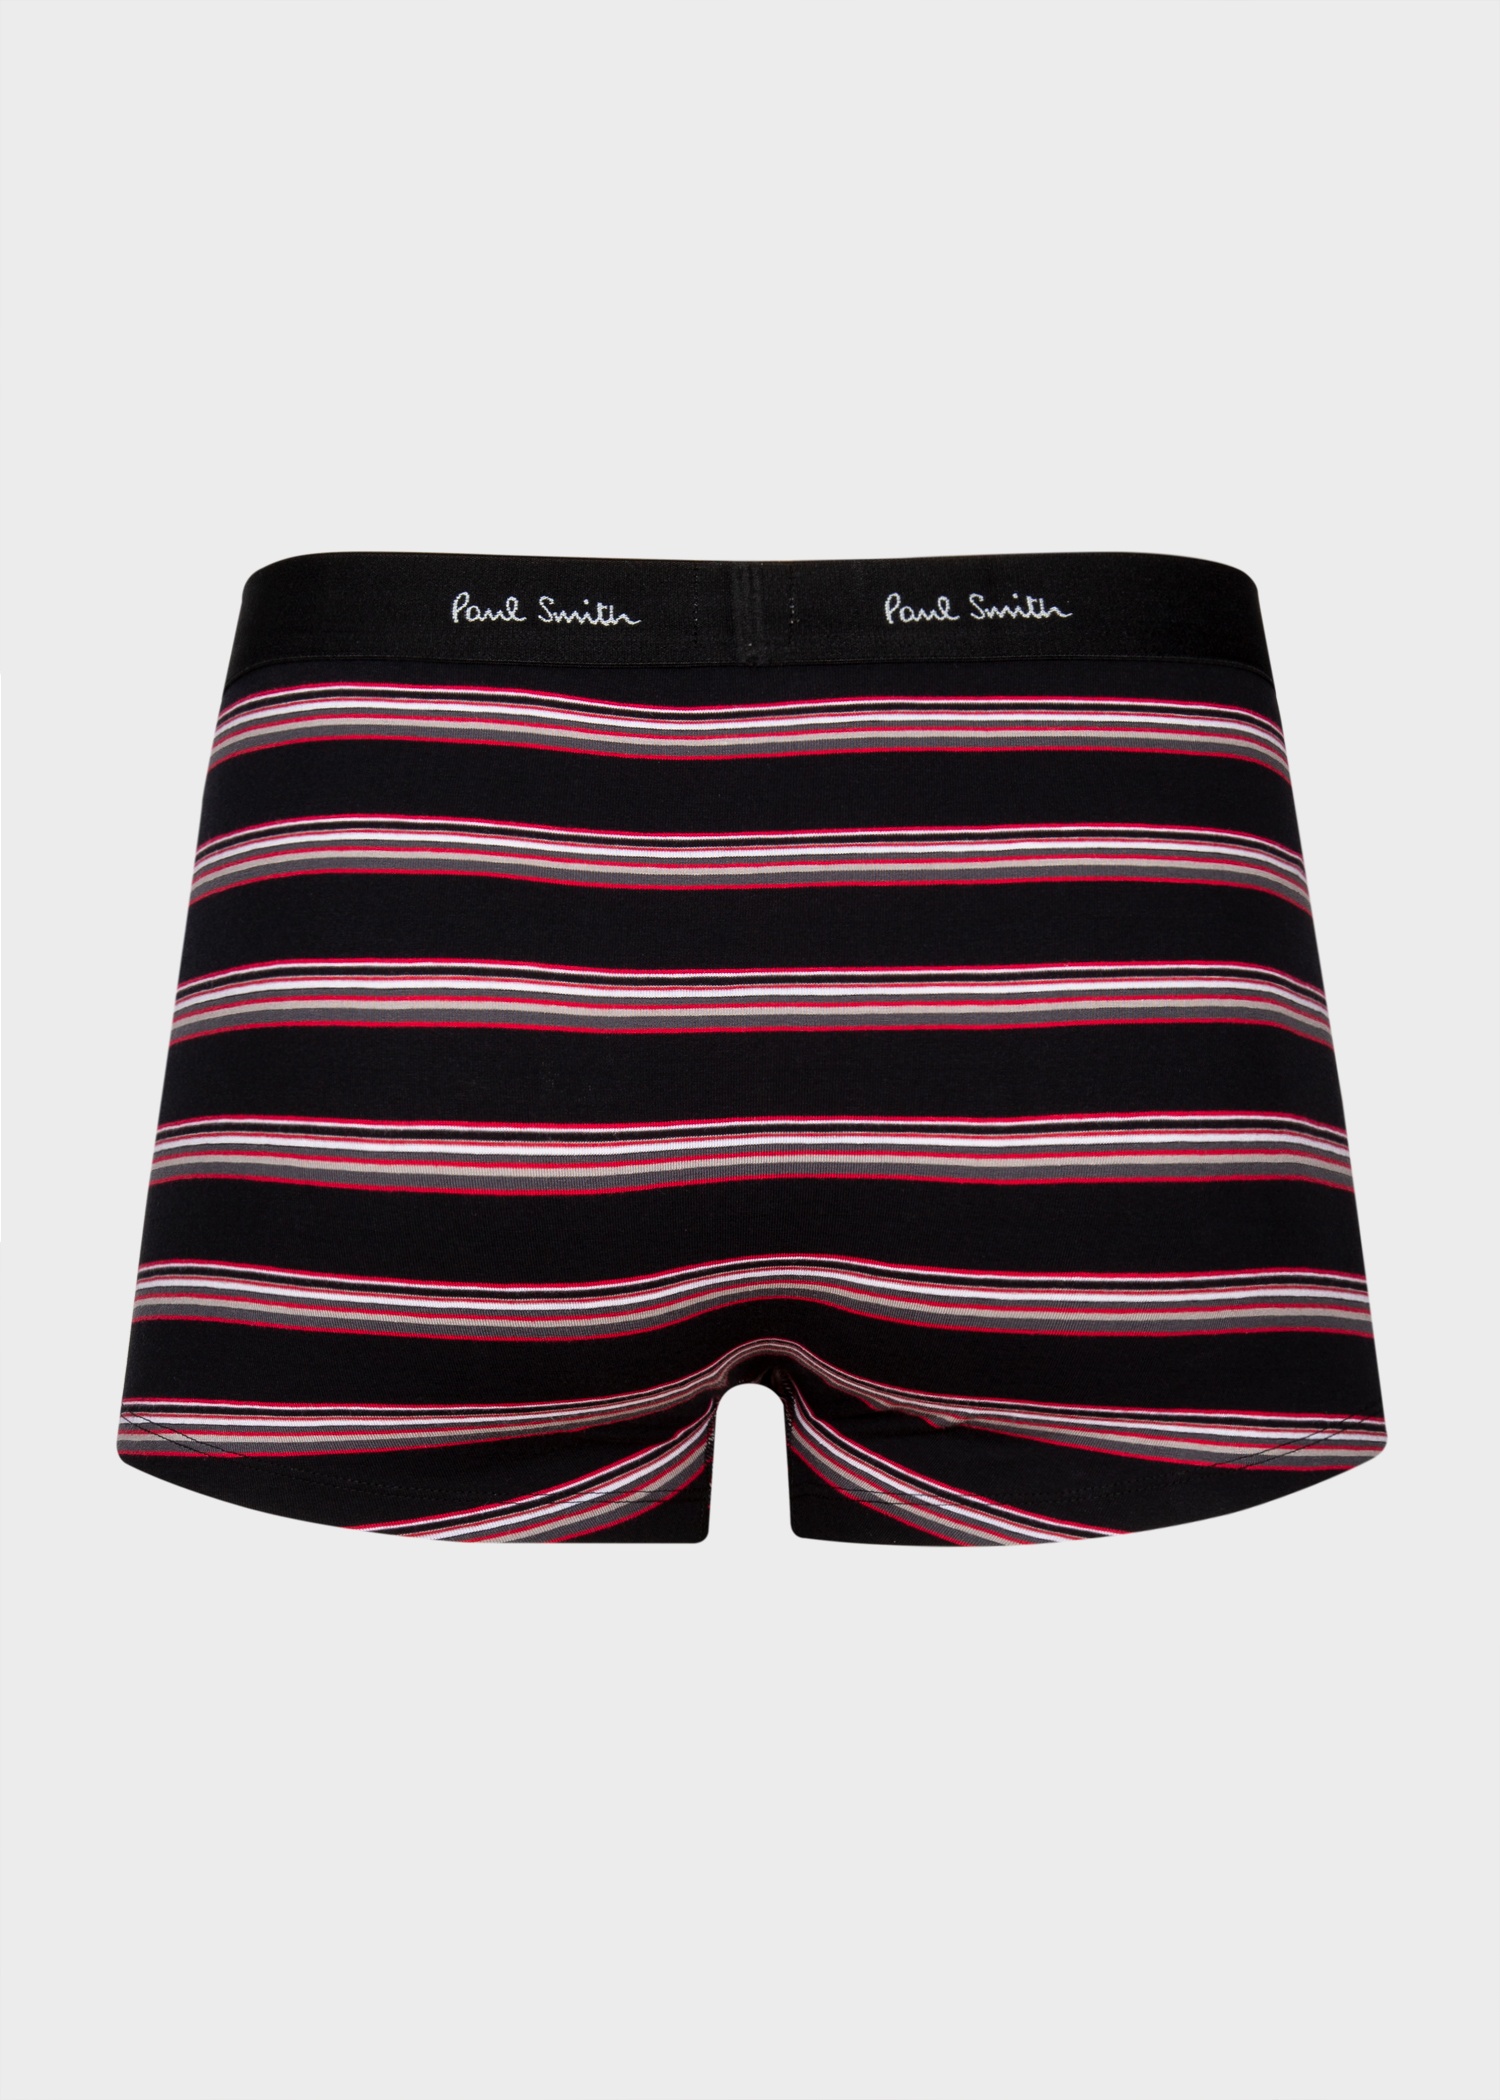 Paul Smith & Manchester United - Low-Rise Boxer Briefs - 4